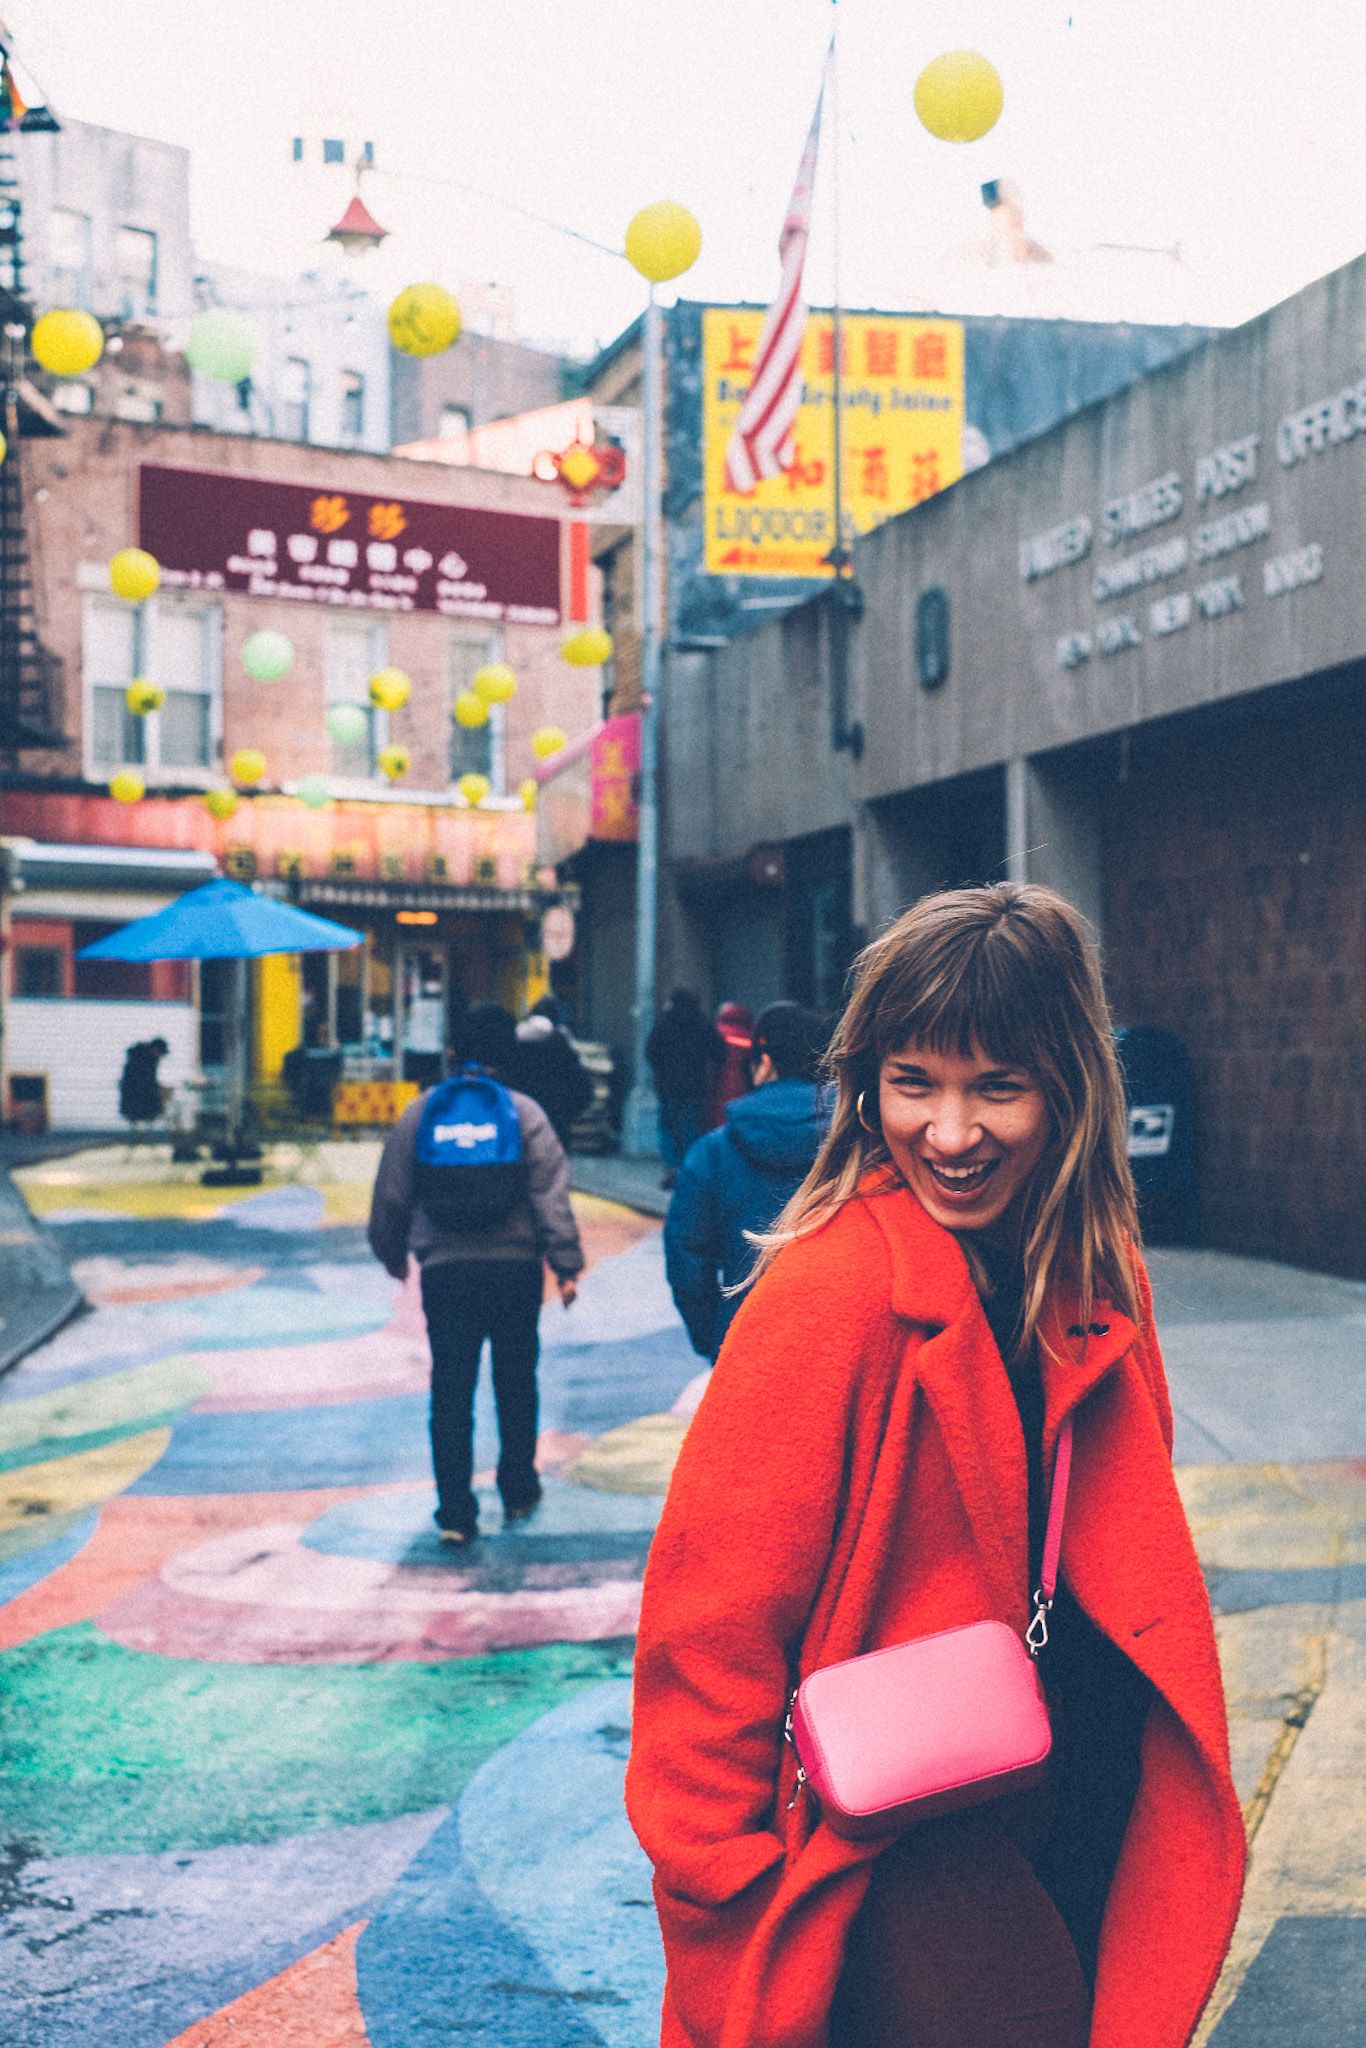 A woman in a red coat with a pink purse smiles, posing in front of a colorfully painted street in Chinatown. Yellow lanterns hang over the walkway and people mill about in the background.